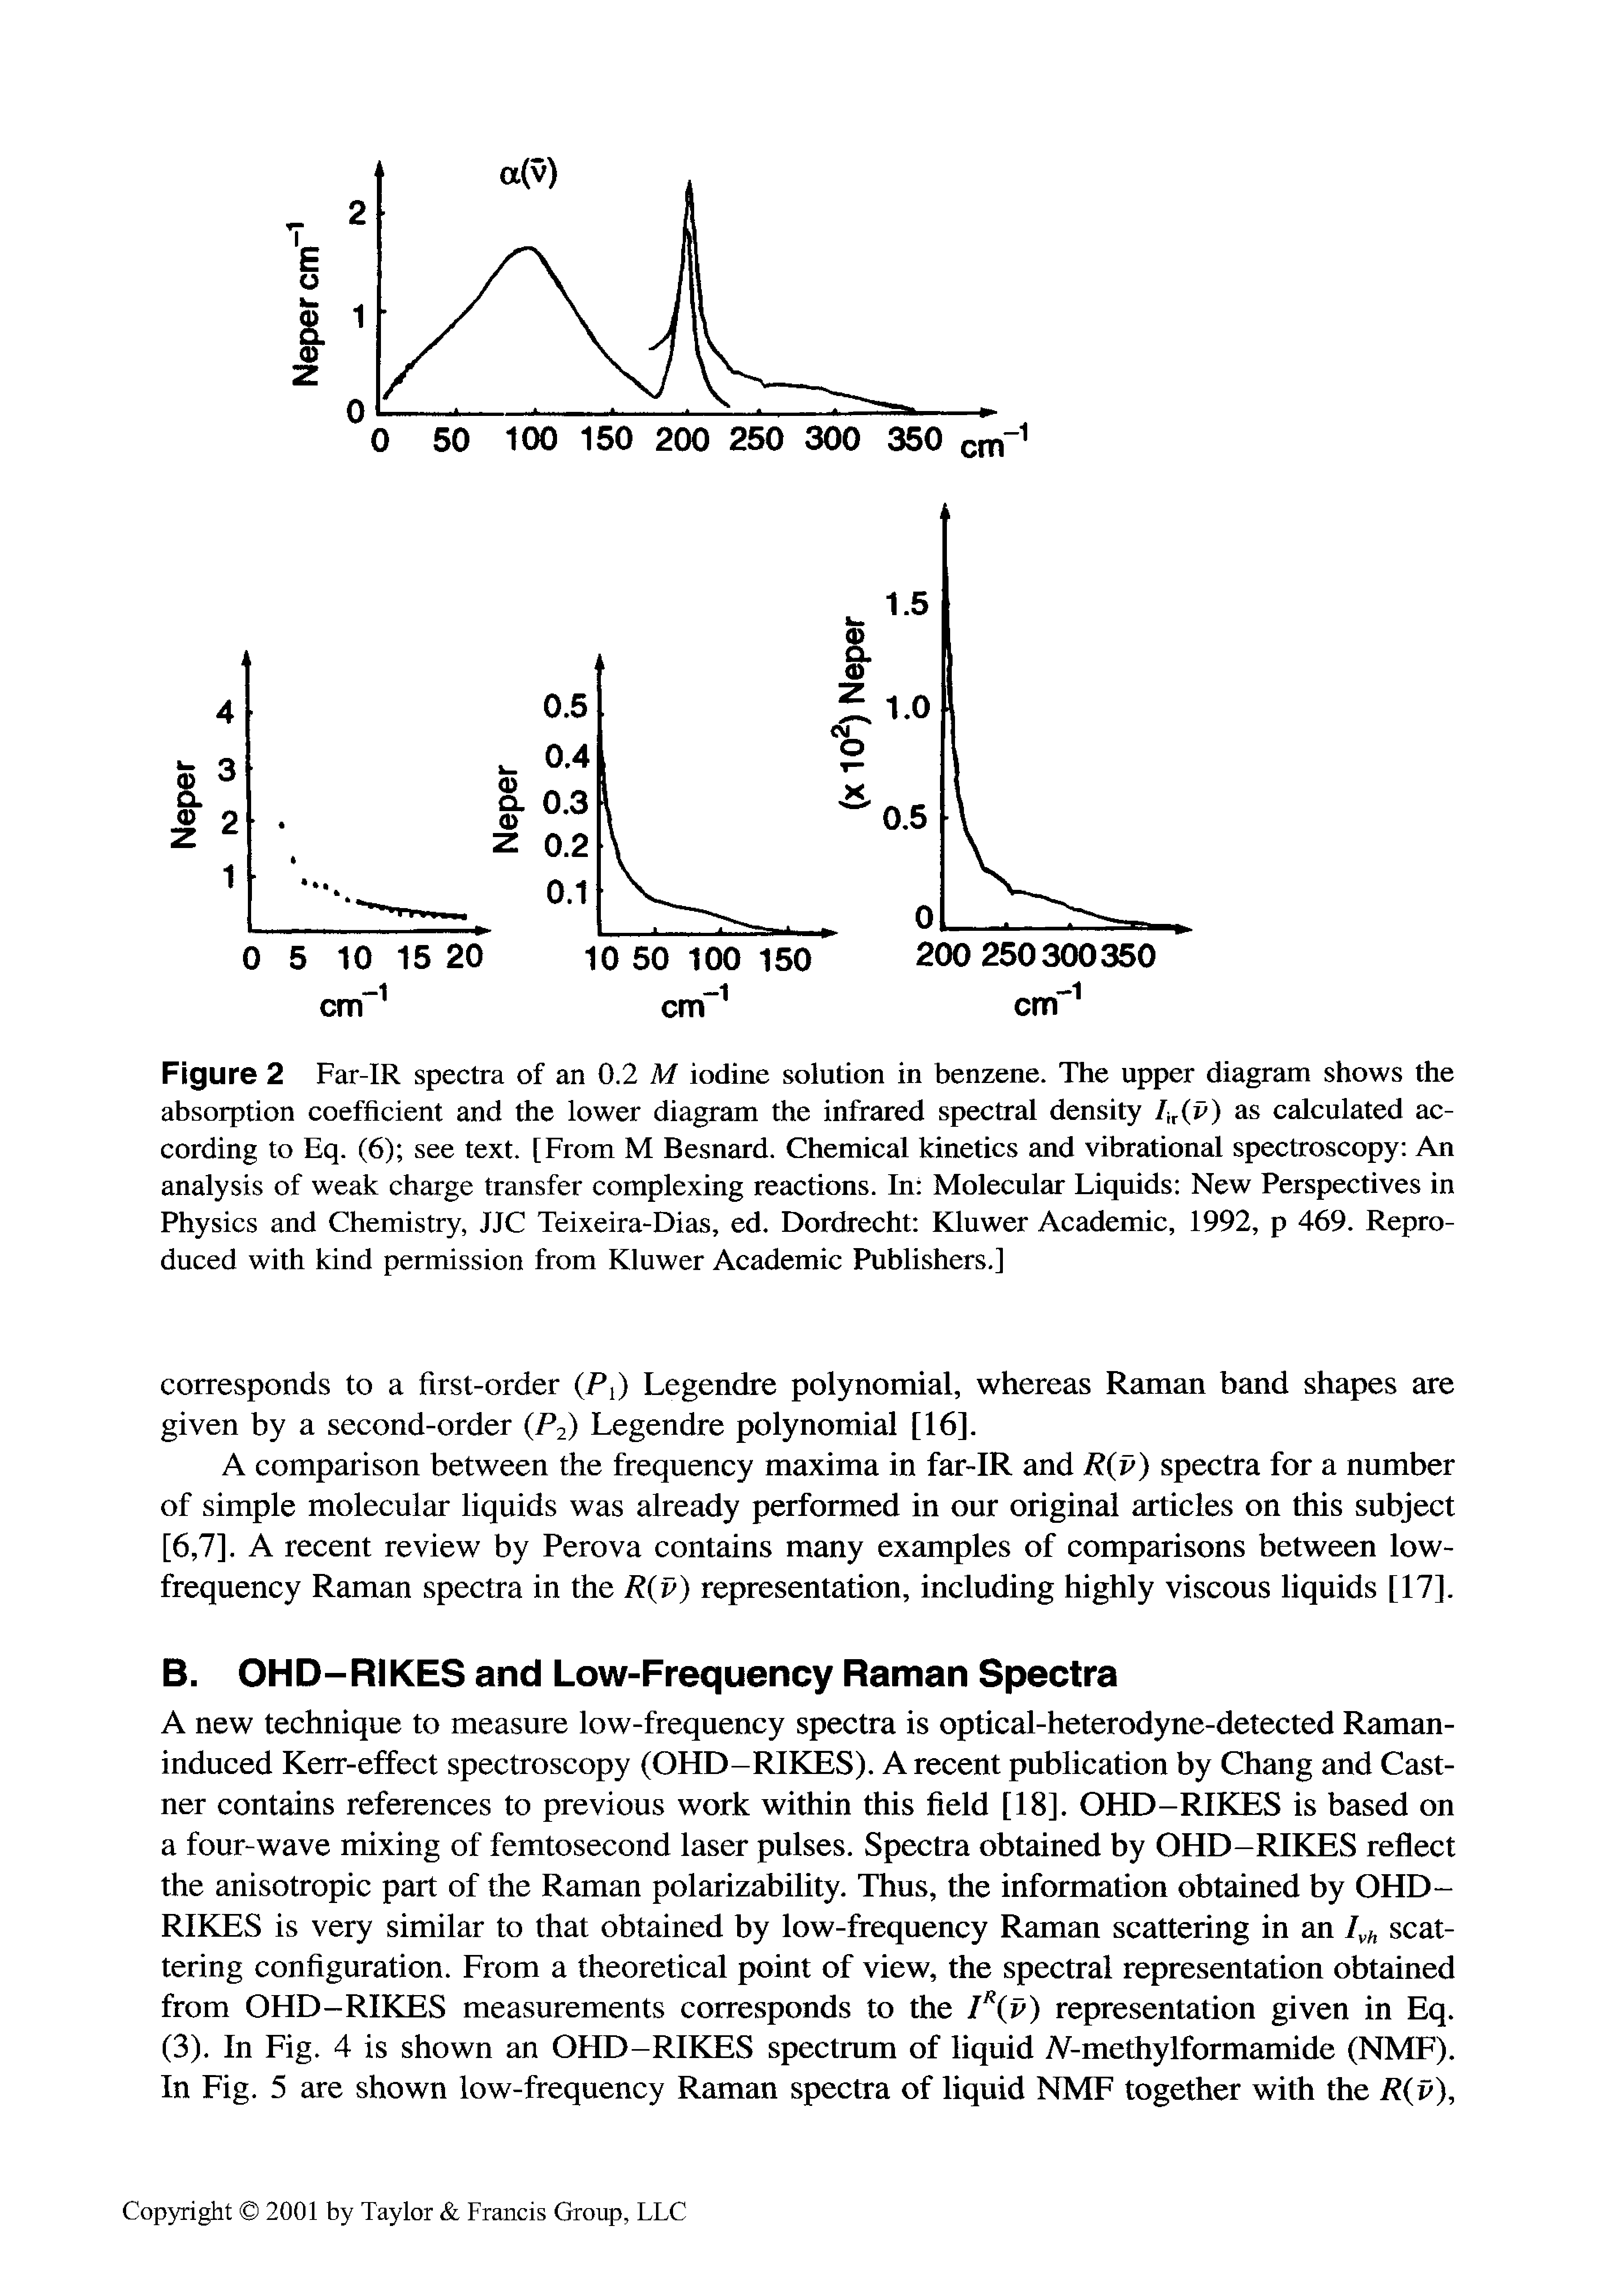 Figure 2 Far-IR spectra of an 0.2 M iodine solution in benzene. The upper diagram shows the absorption coefficient and the lower diagram the infrared spectral density Uriy) as calculated according to Eq. (6) see text. [From M Besnard. Chemical kinetics and vibrational spectroscopy An analysis of weak charge transfer complexing reactions. In Molecular Liquids New Perspectives in Physics and Chemistry, JJC Teixeira-Dias, ed. Dordrecht Kluwer Academic, 1992, p 469. Reproduced with kind permission from Kluwer Academic Publishers.]...